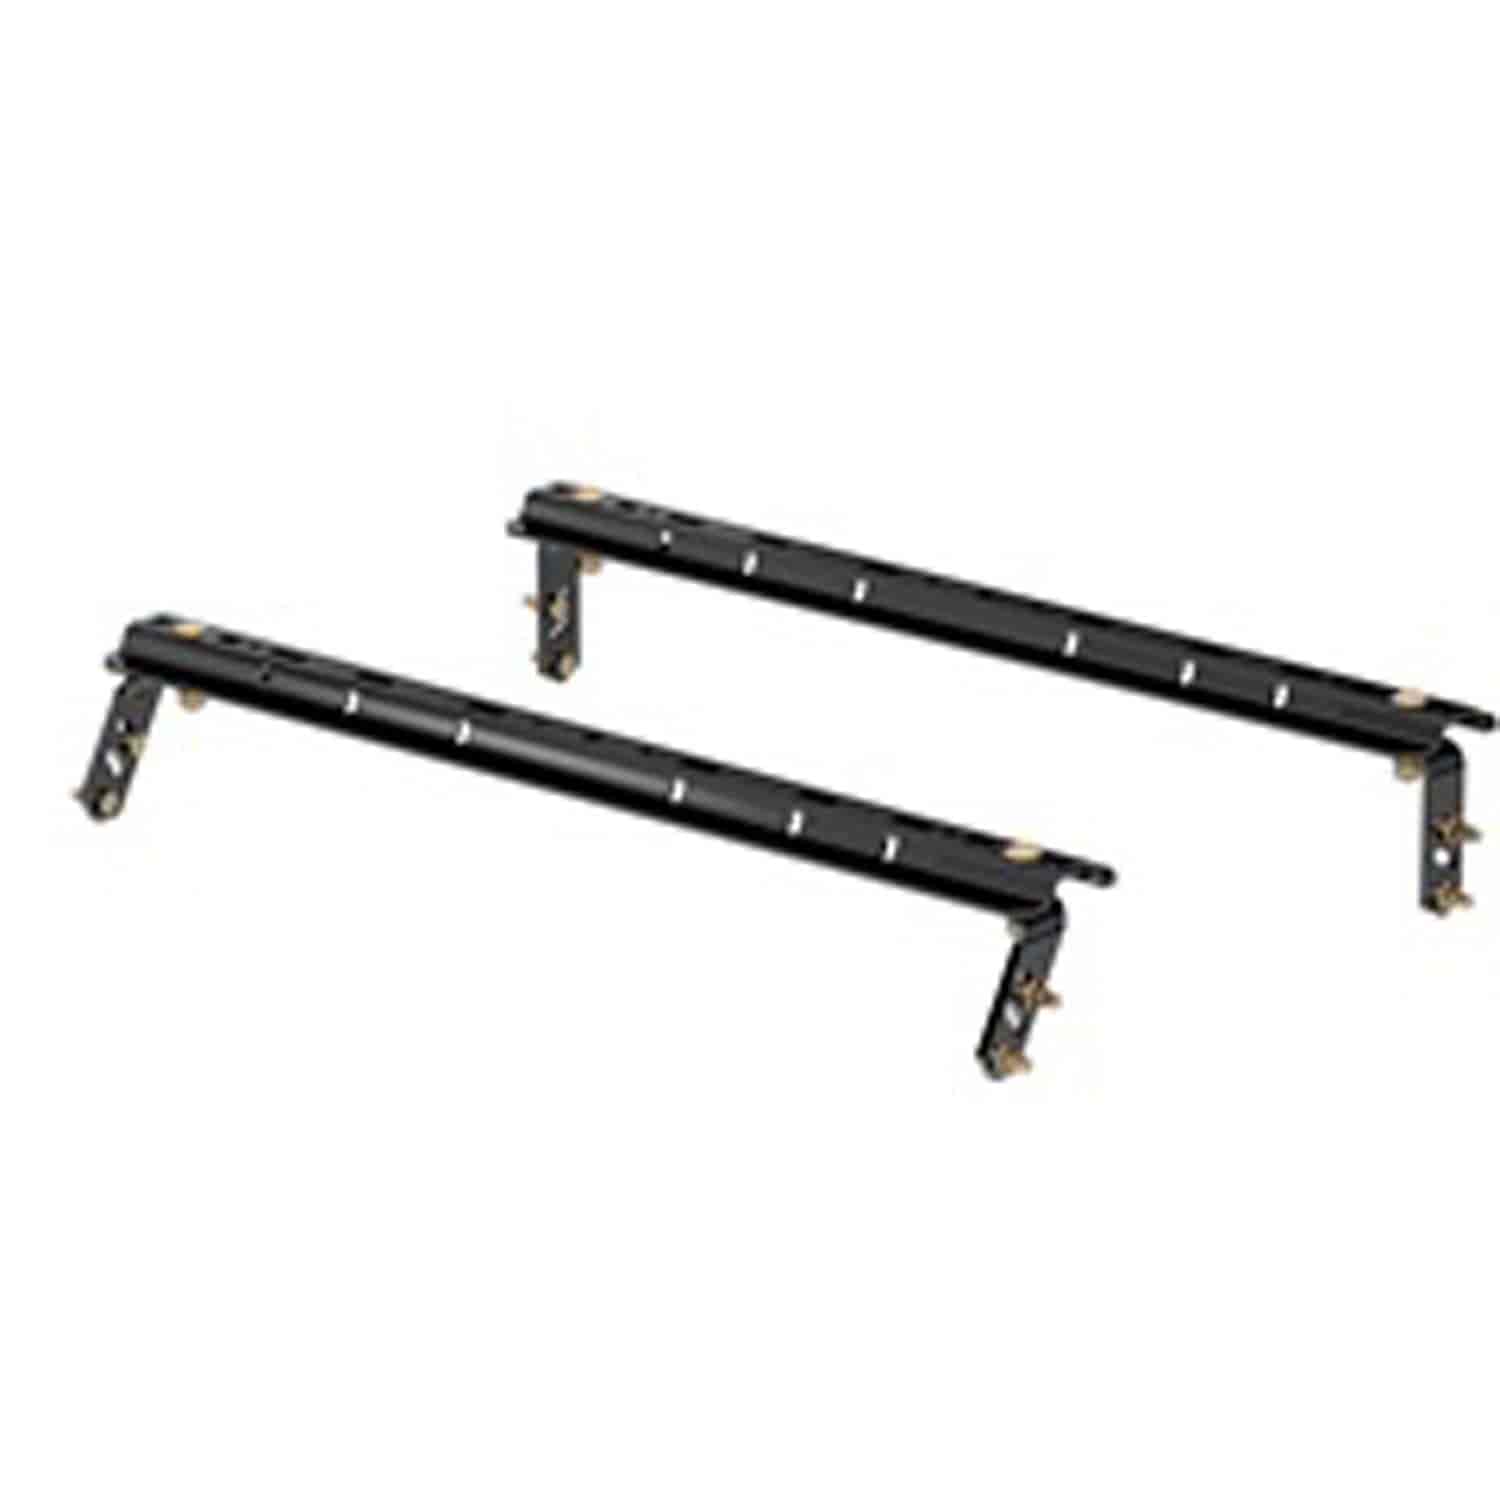 FIFTH WHEEL RAILS WITH UNIVERSAL BACKETS AND HARDWARE 4 BOLT DESIGN